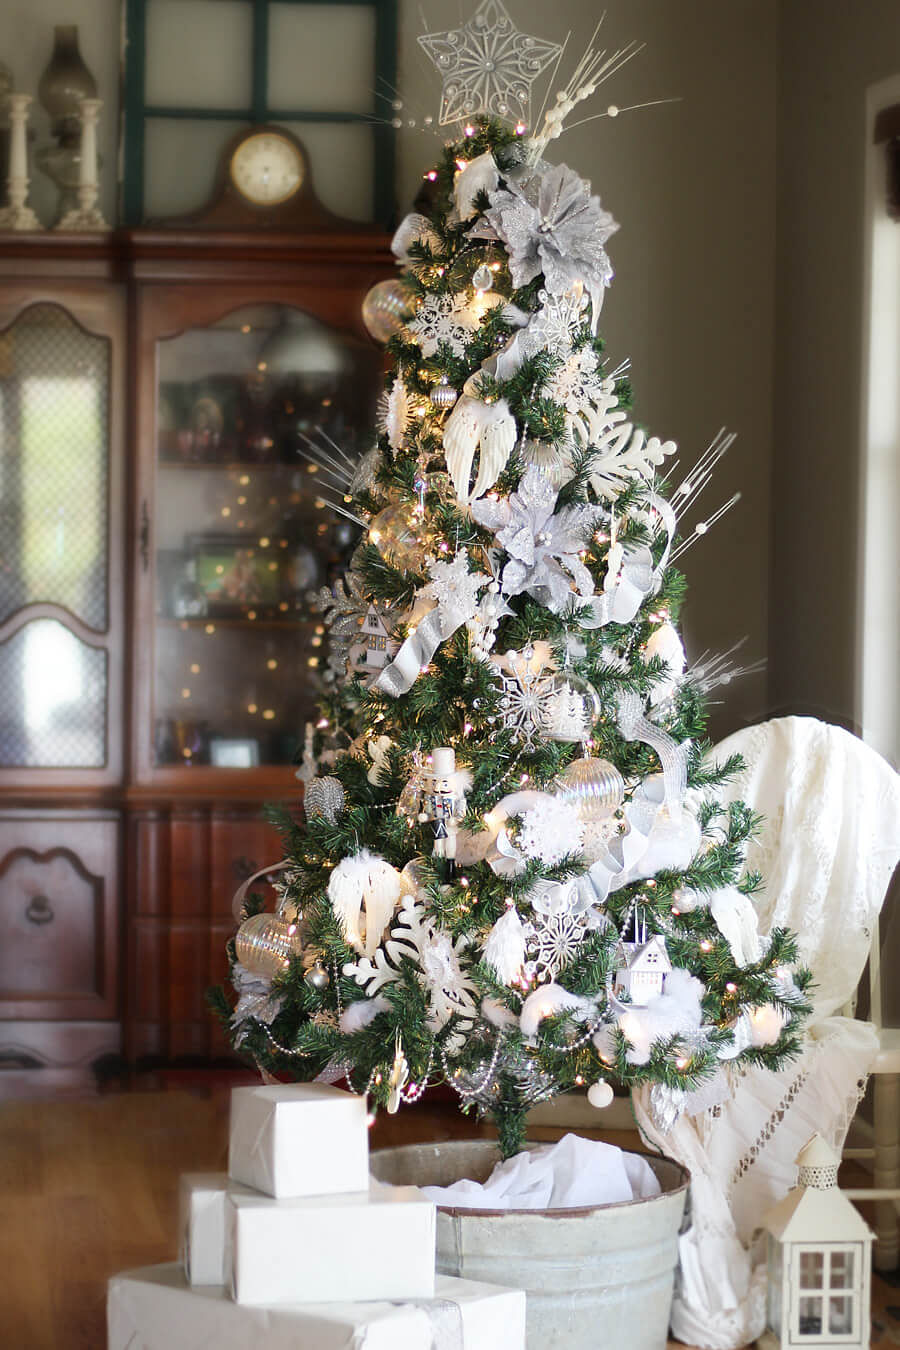 Transform your living room with these 10 beautiful Christmas tree decoration Ideas for Christmas 2021